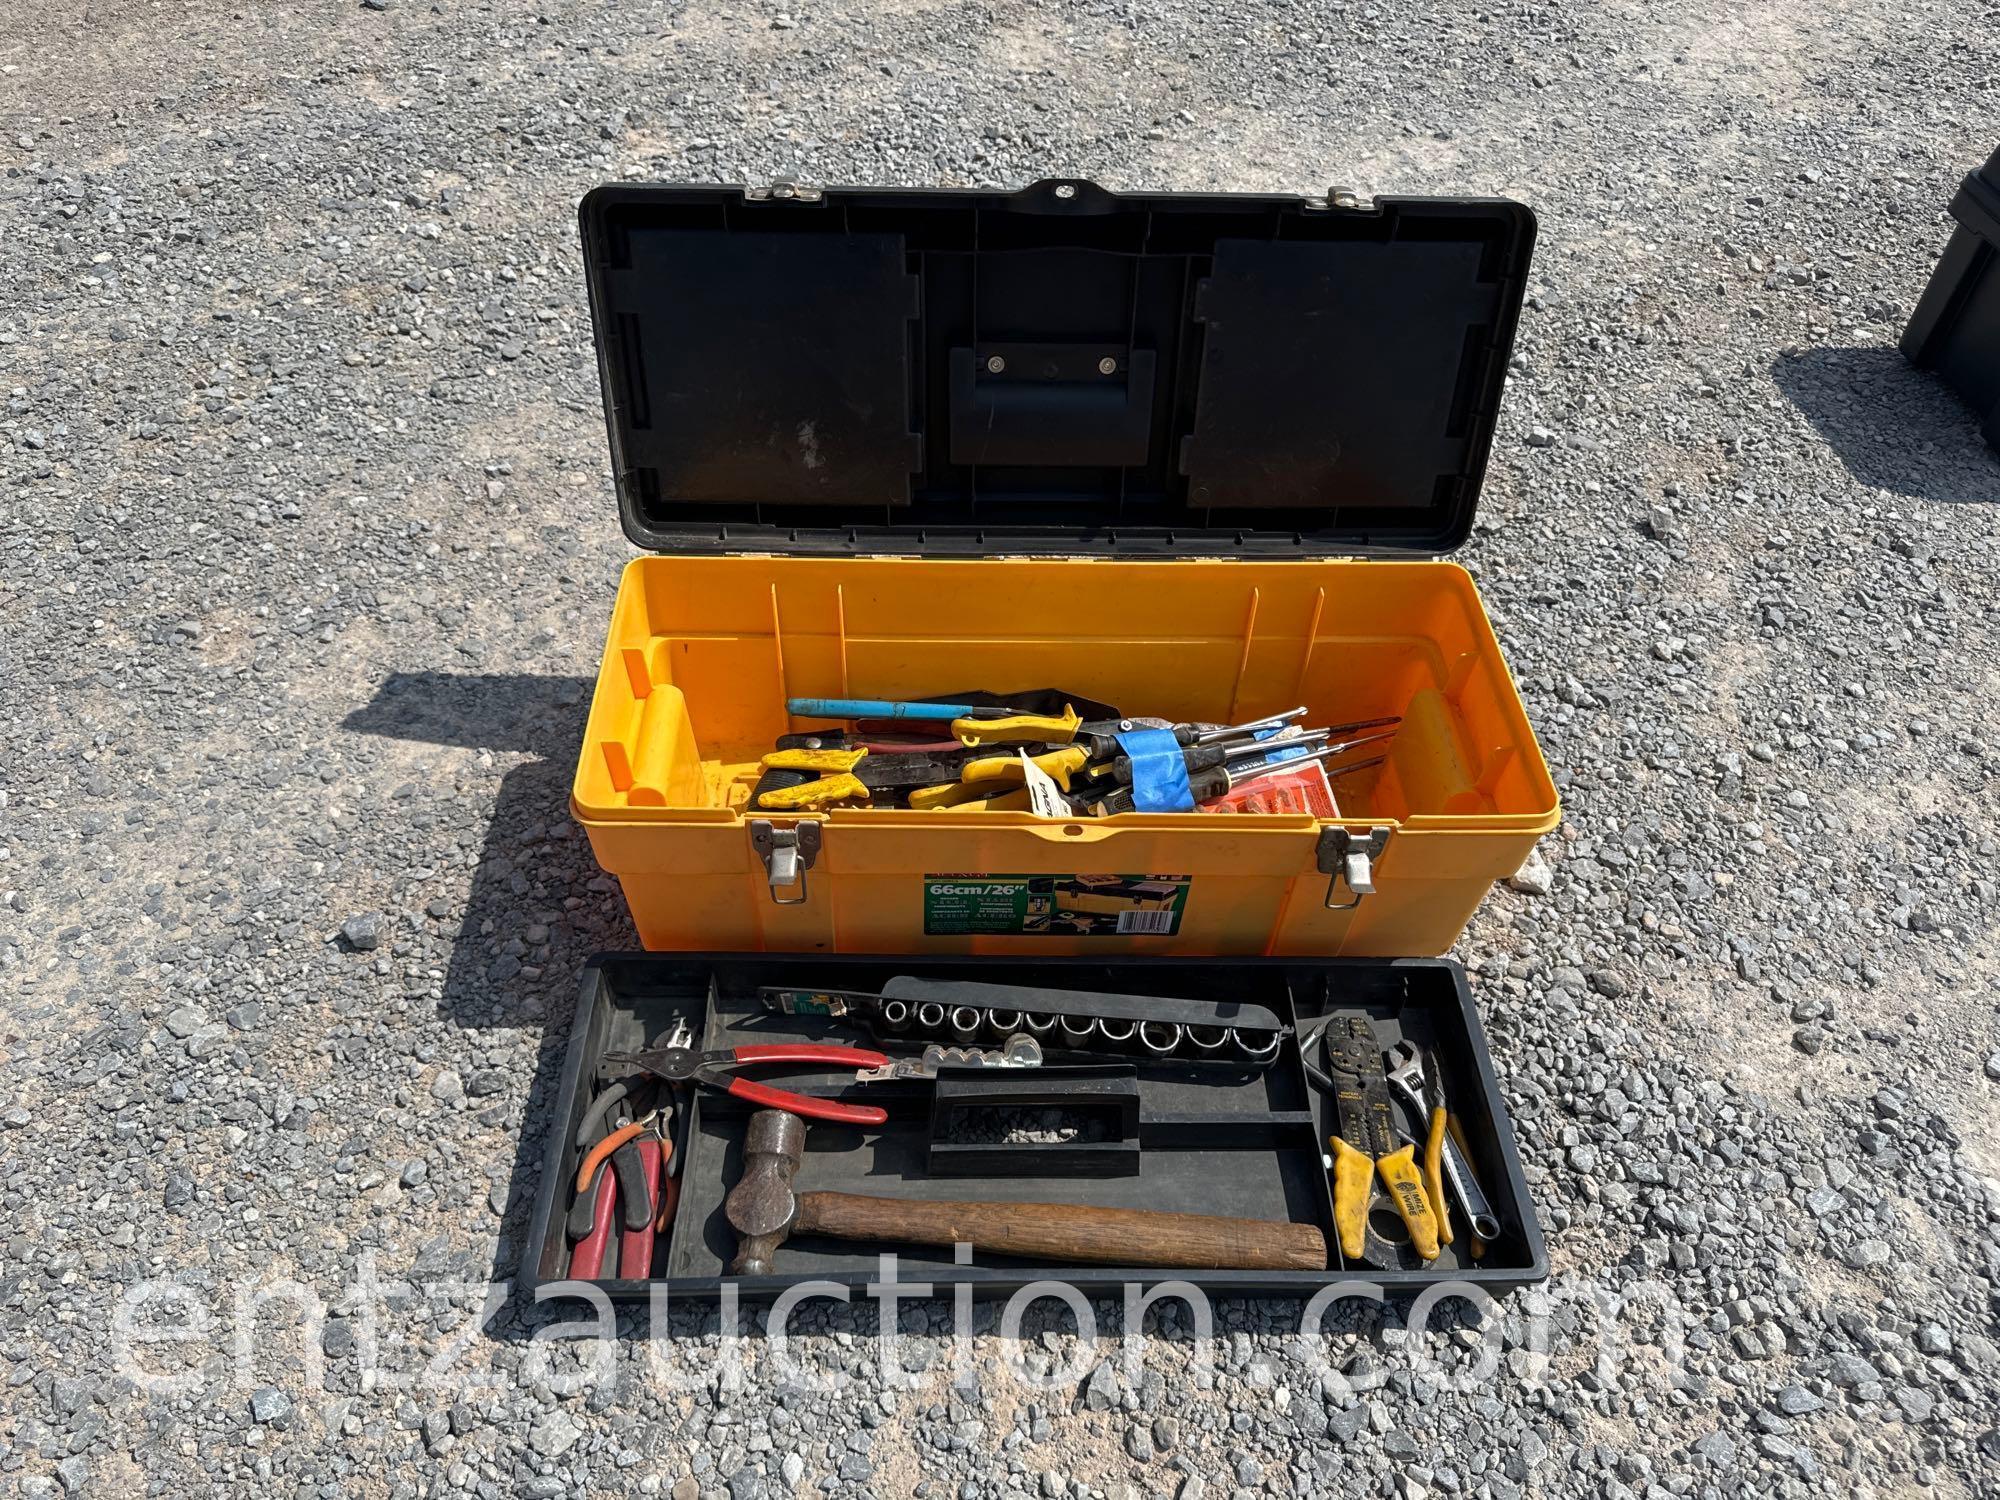 3 TOOLBOXES (INVENTORY INCLUDED), SOCKET SET W/